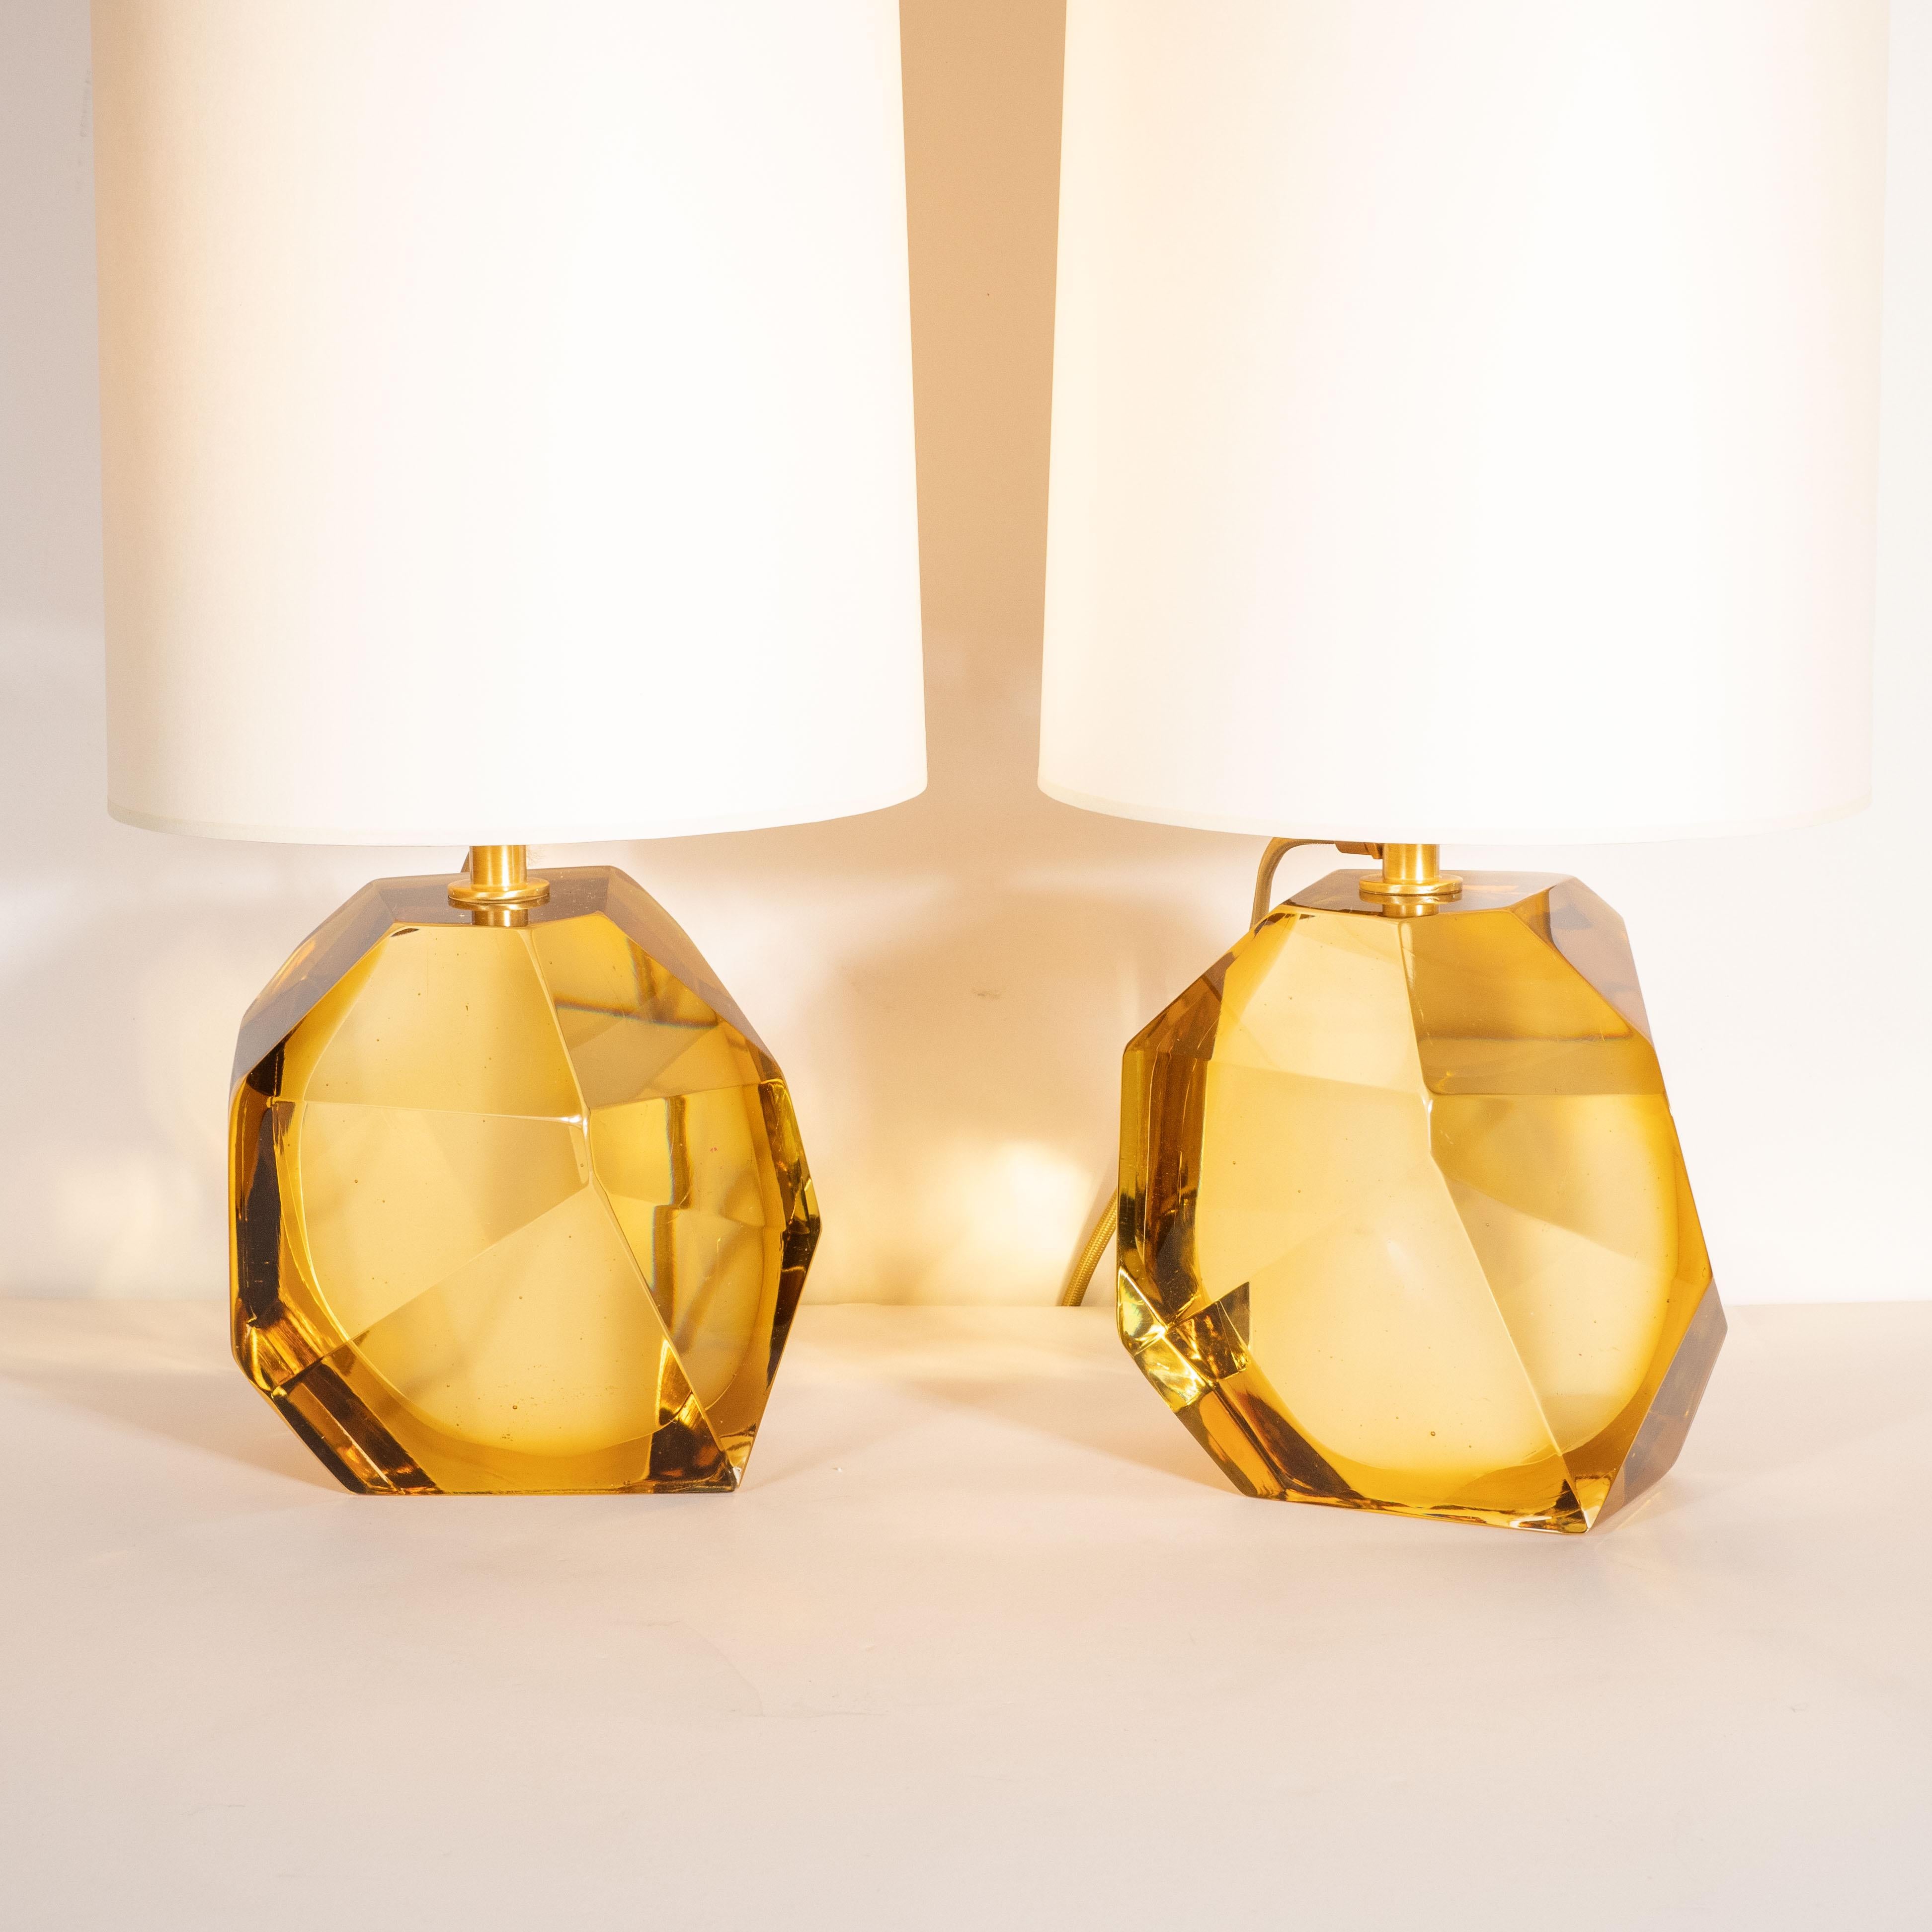 Modernist Faceted Handblown Murano Topaz Glass Table Lamps In Excellent Condition For Sale In New York, NY